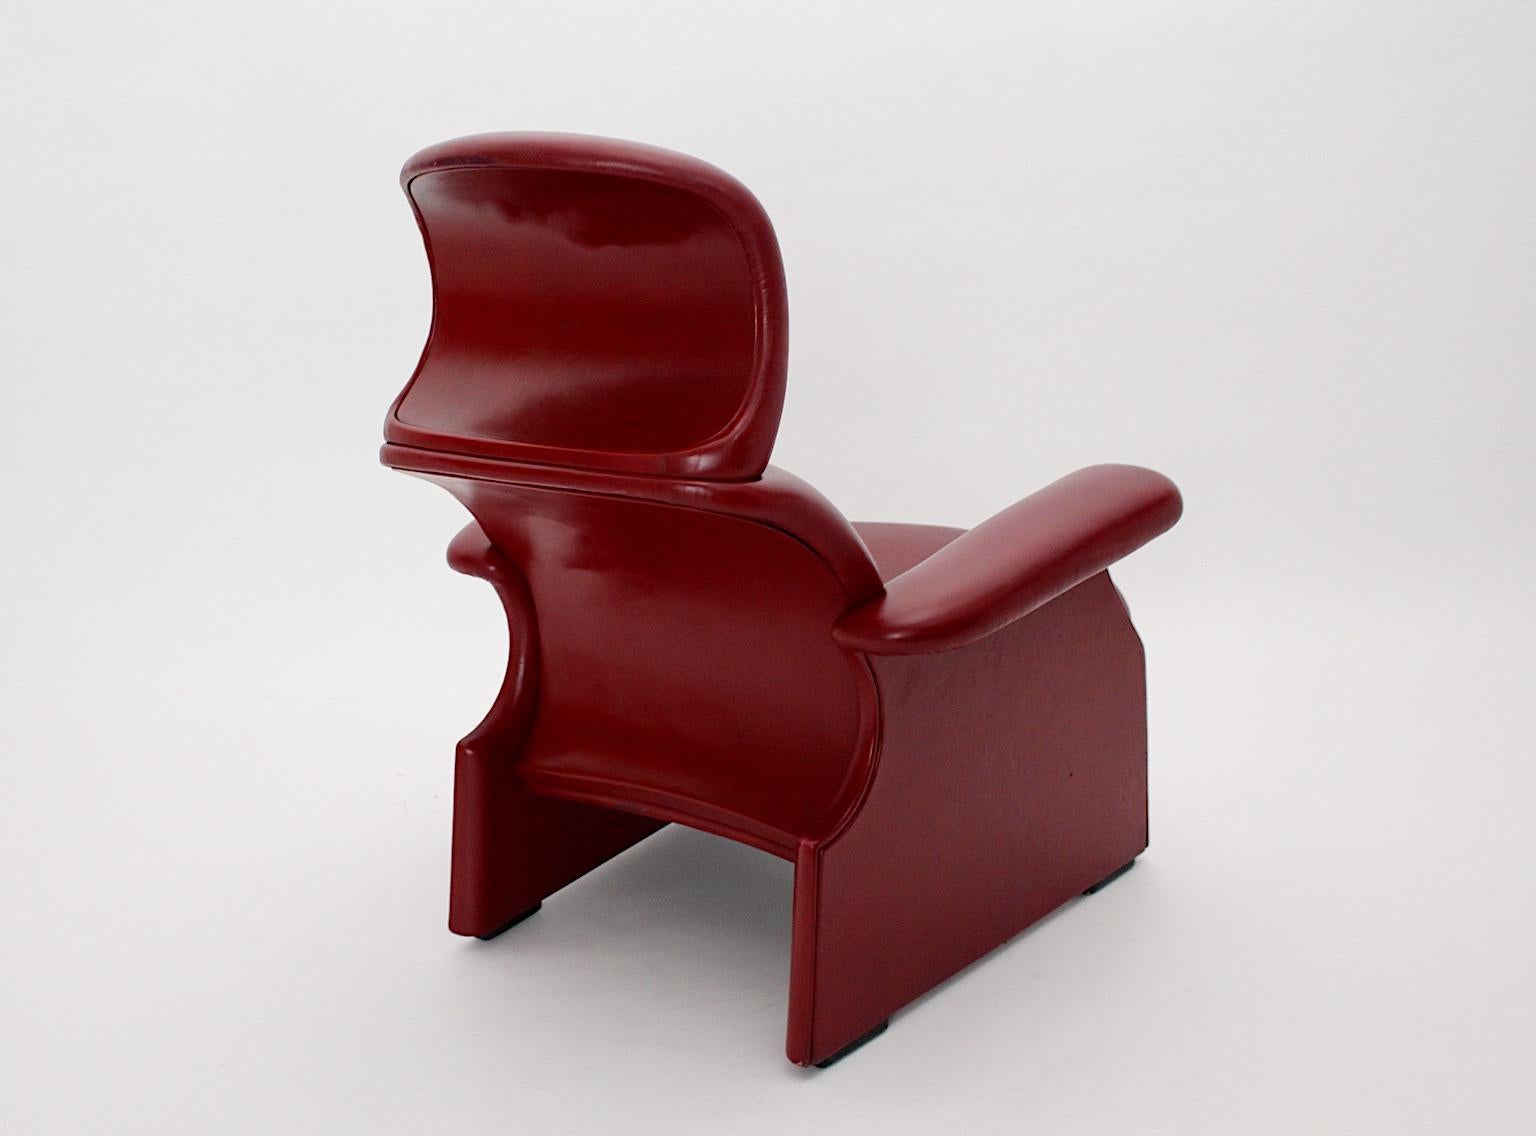 Leather Organic Vintage Sculptural Red Lounge Chair by Achille & Piero Castiglioni 1960s For Sale